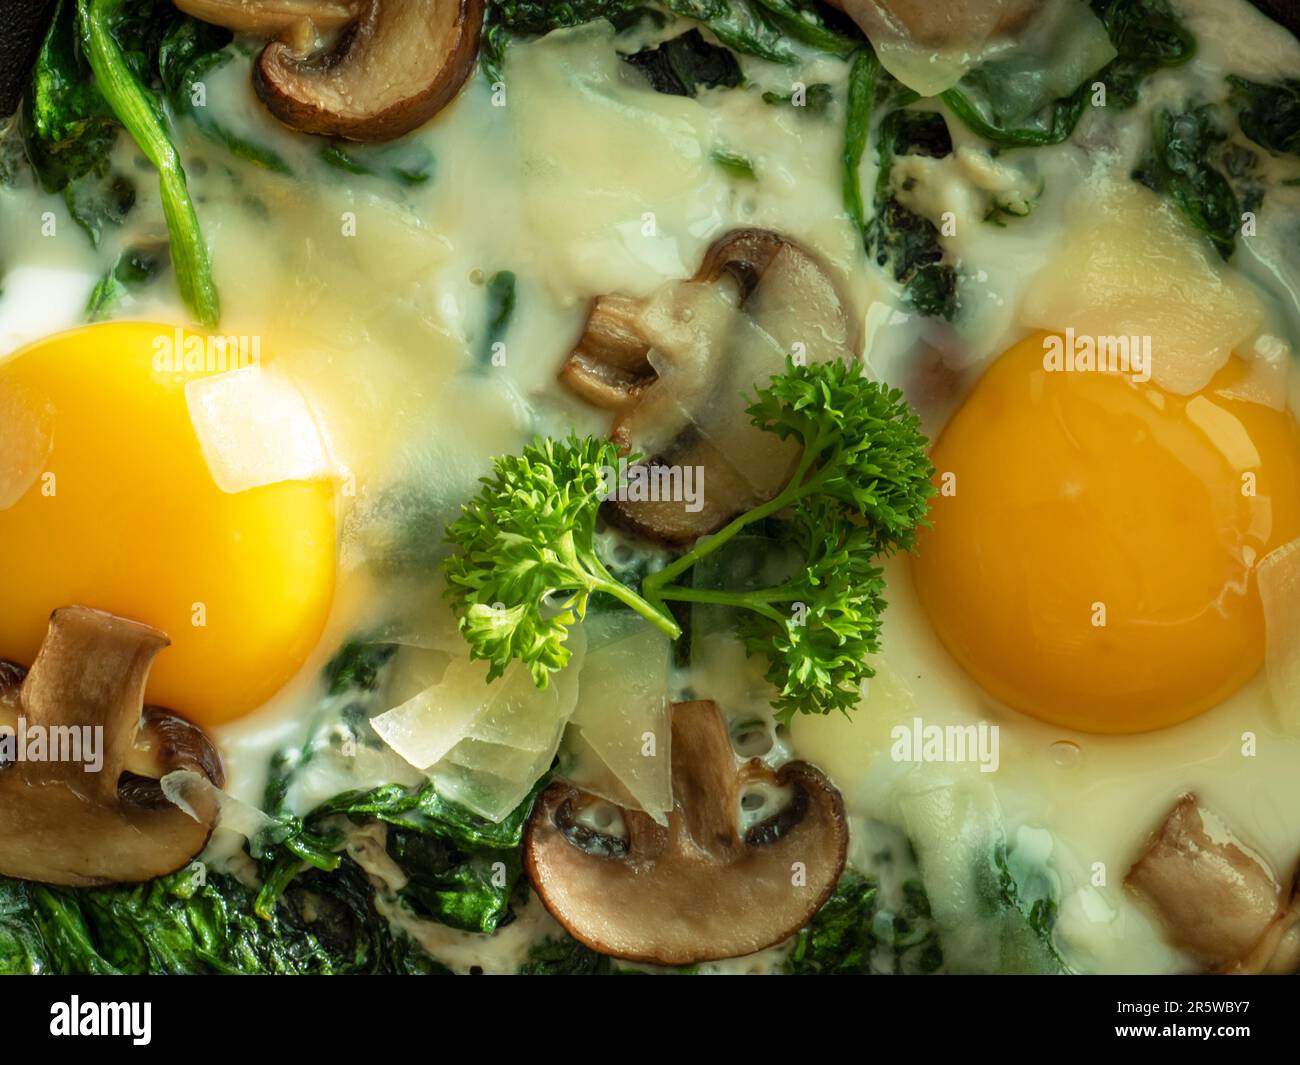 Idea for breakfast. Two eggs with spinach, mushrooms and cheese. Healthy homemade dish for low carb diet. Top view. Macro food Stock Photo